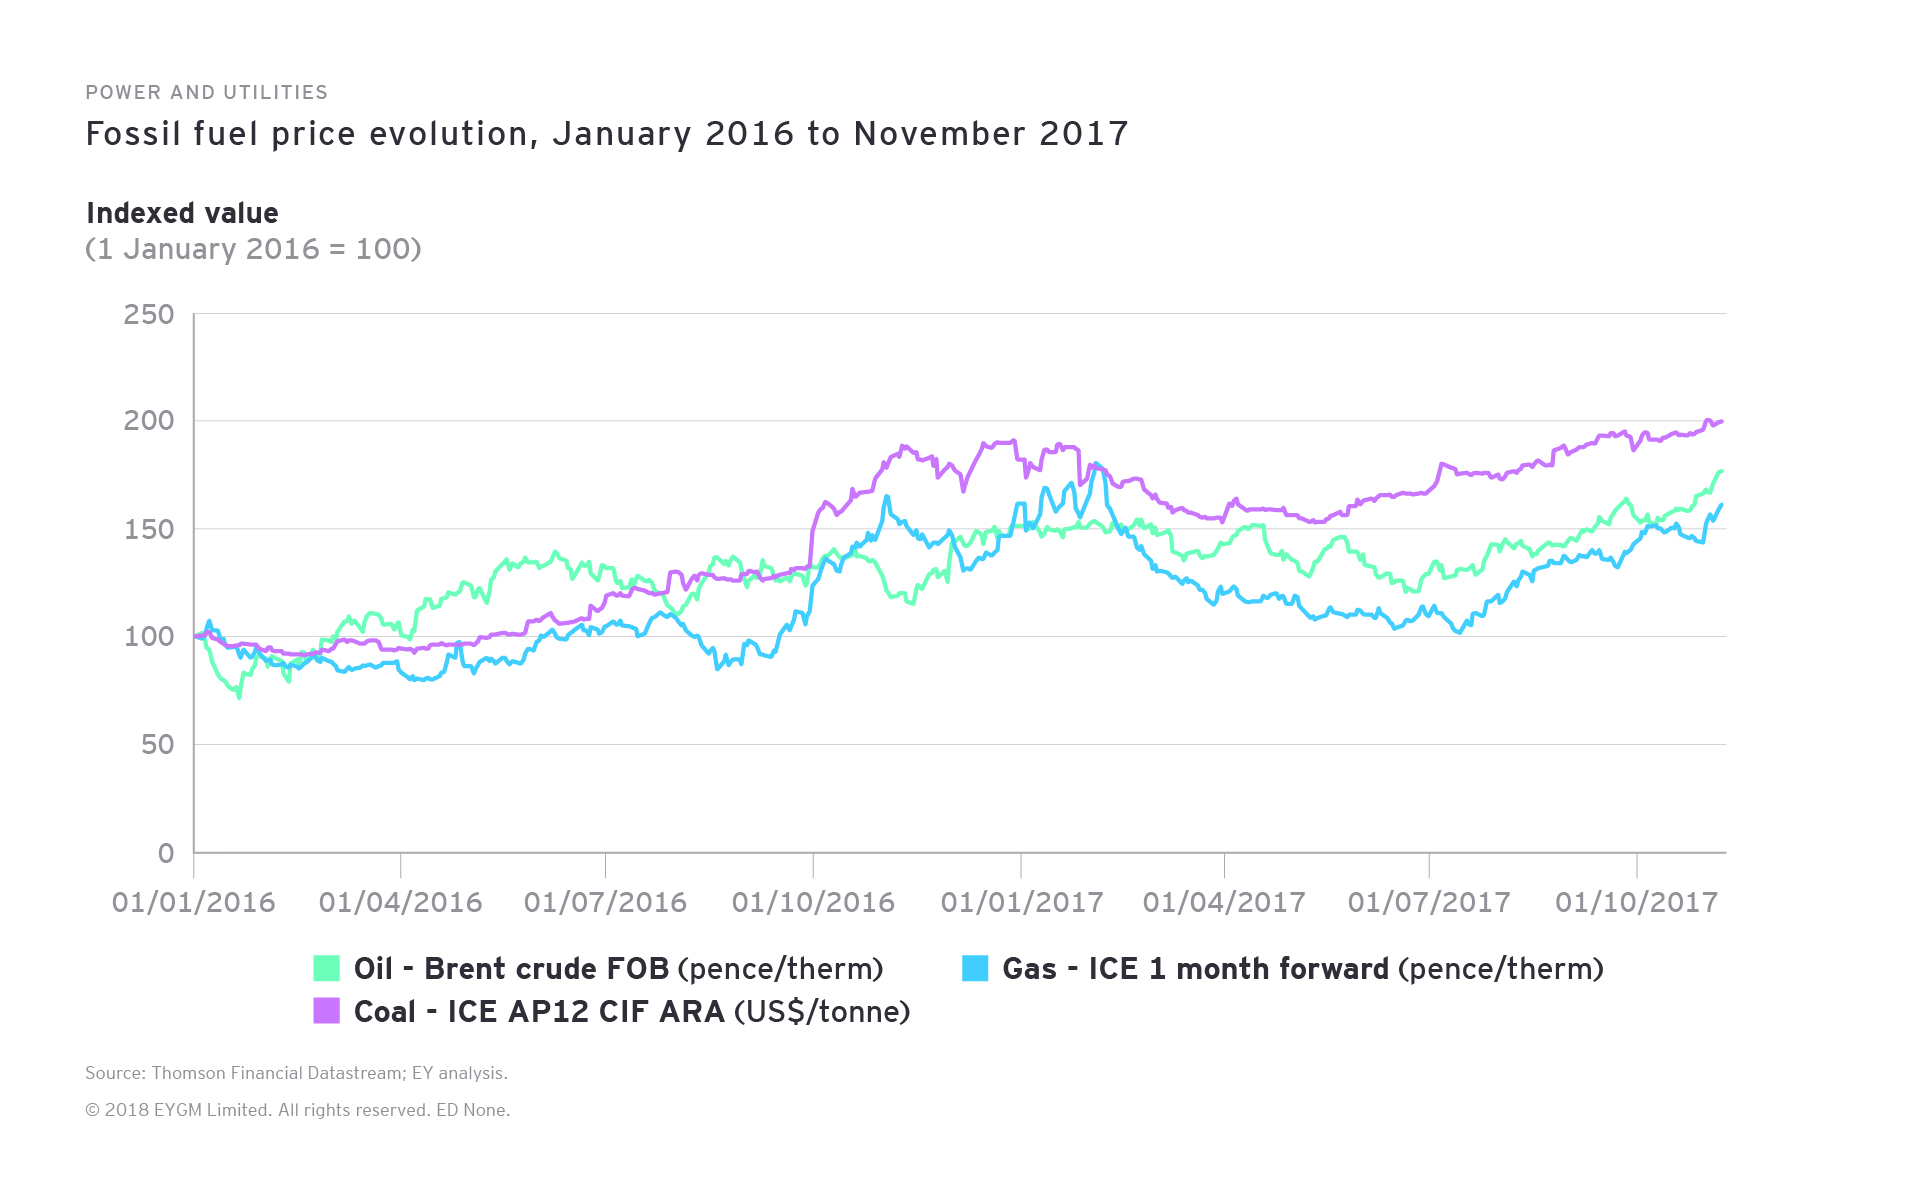 Power and Utilities. Fossil fuel price evolution, January 2016 - November 2017